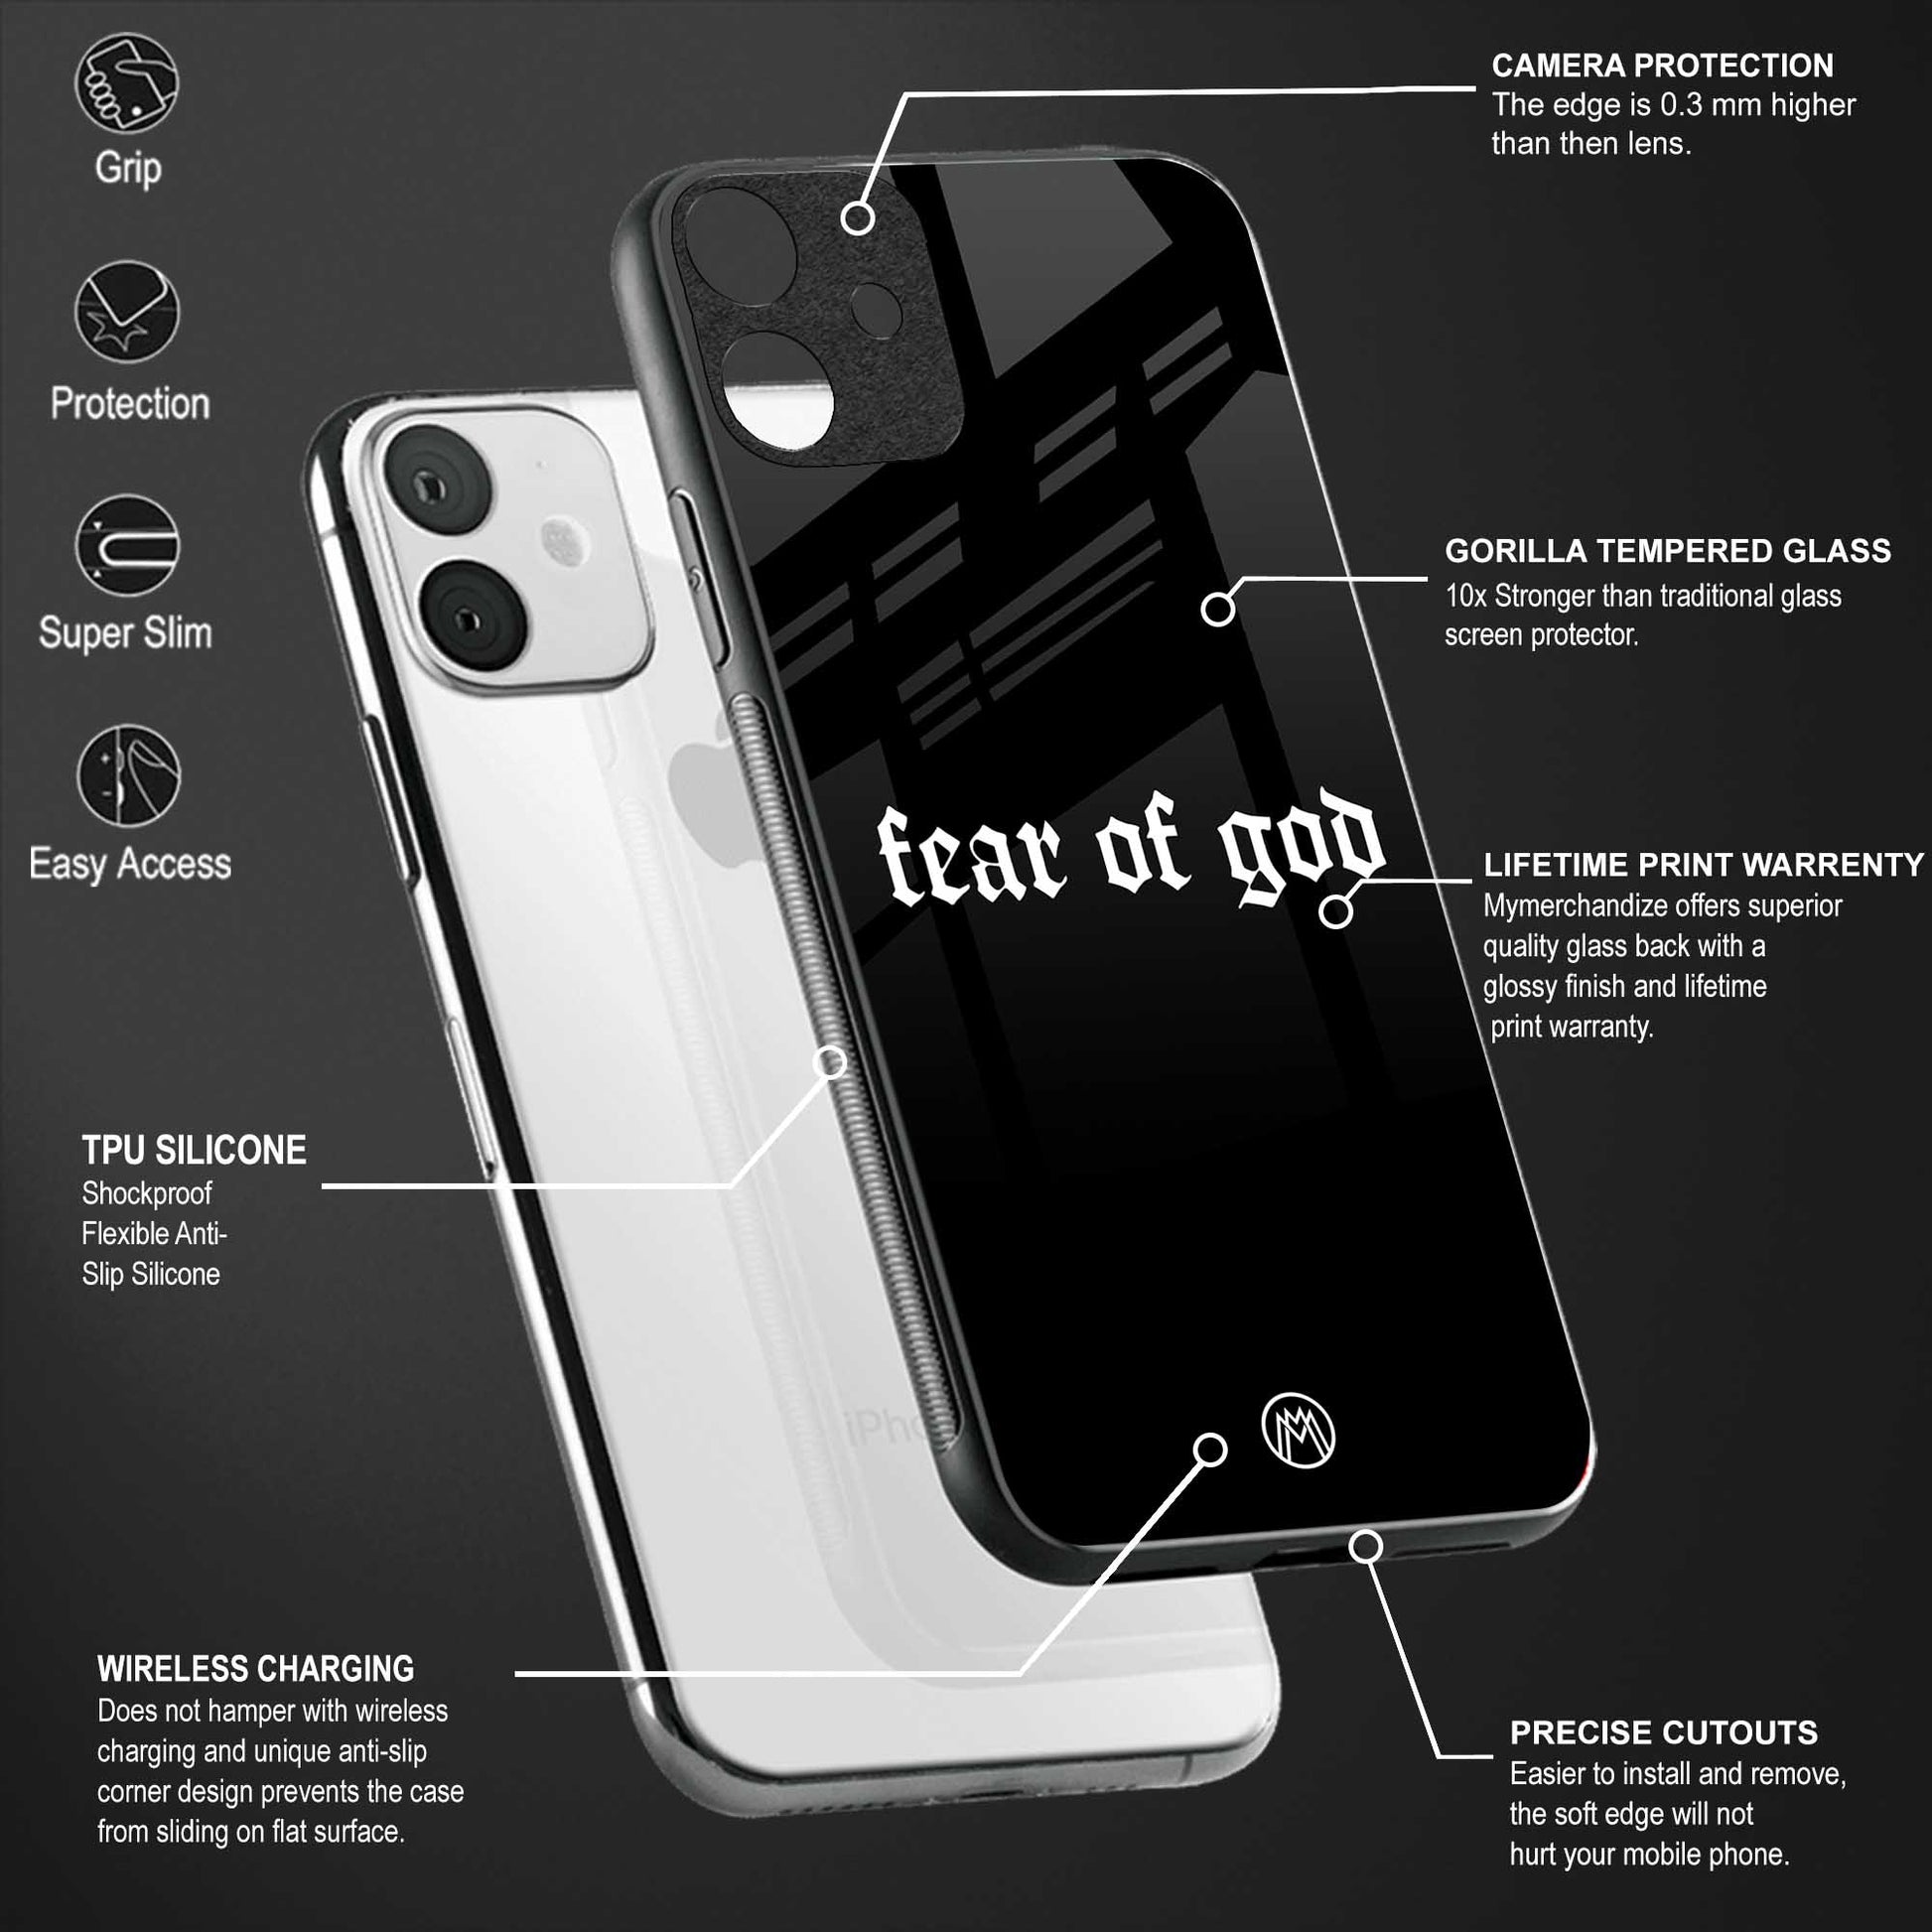 fear of god phone cover for realme 3i